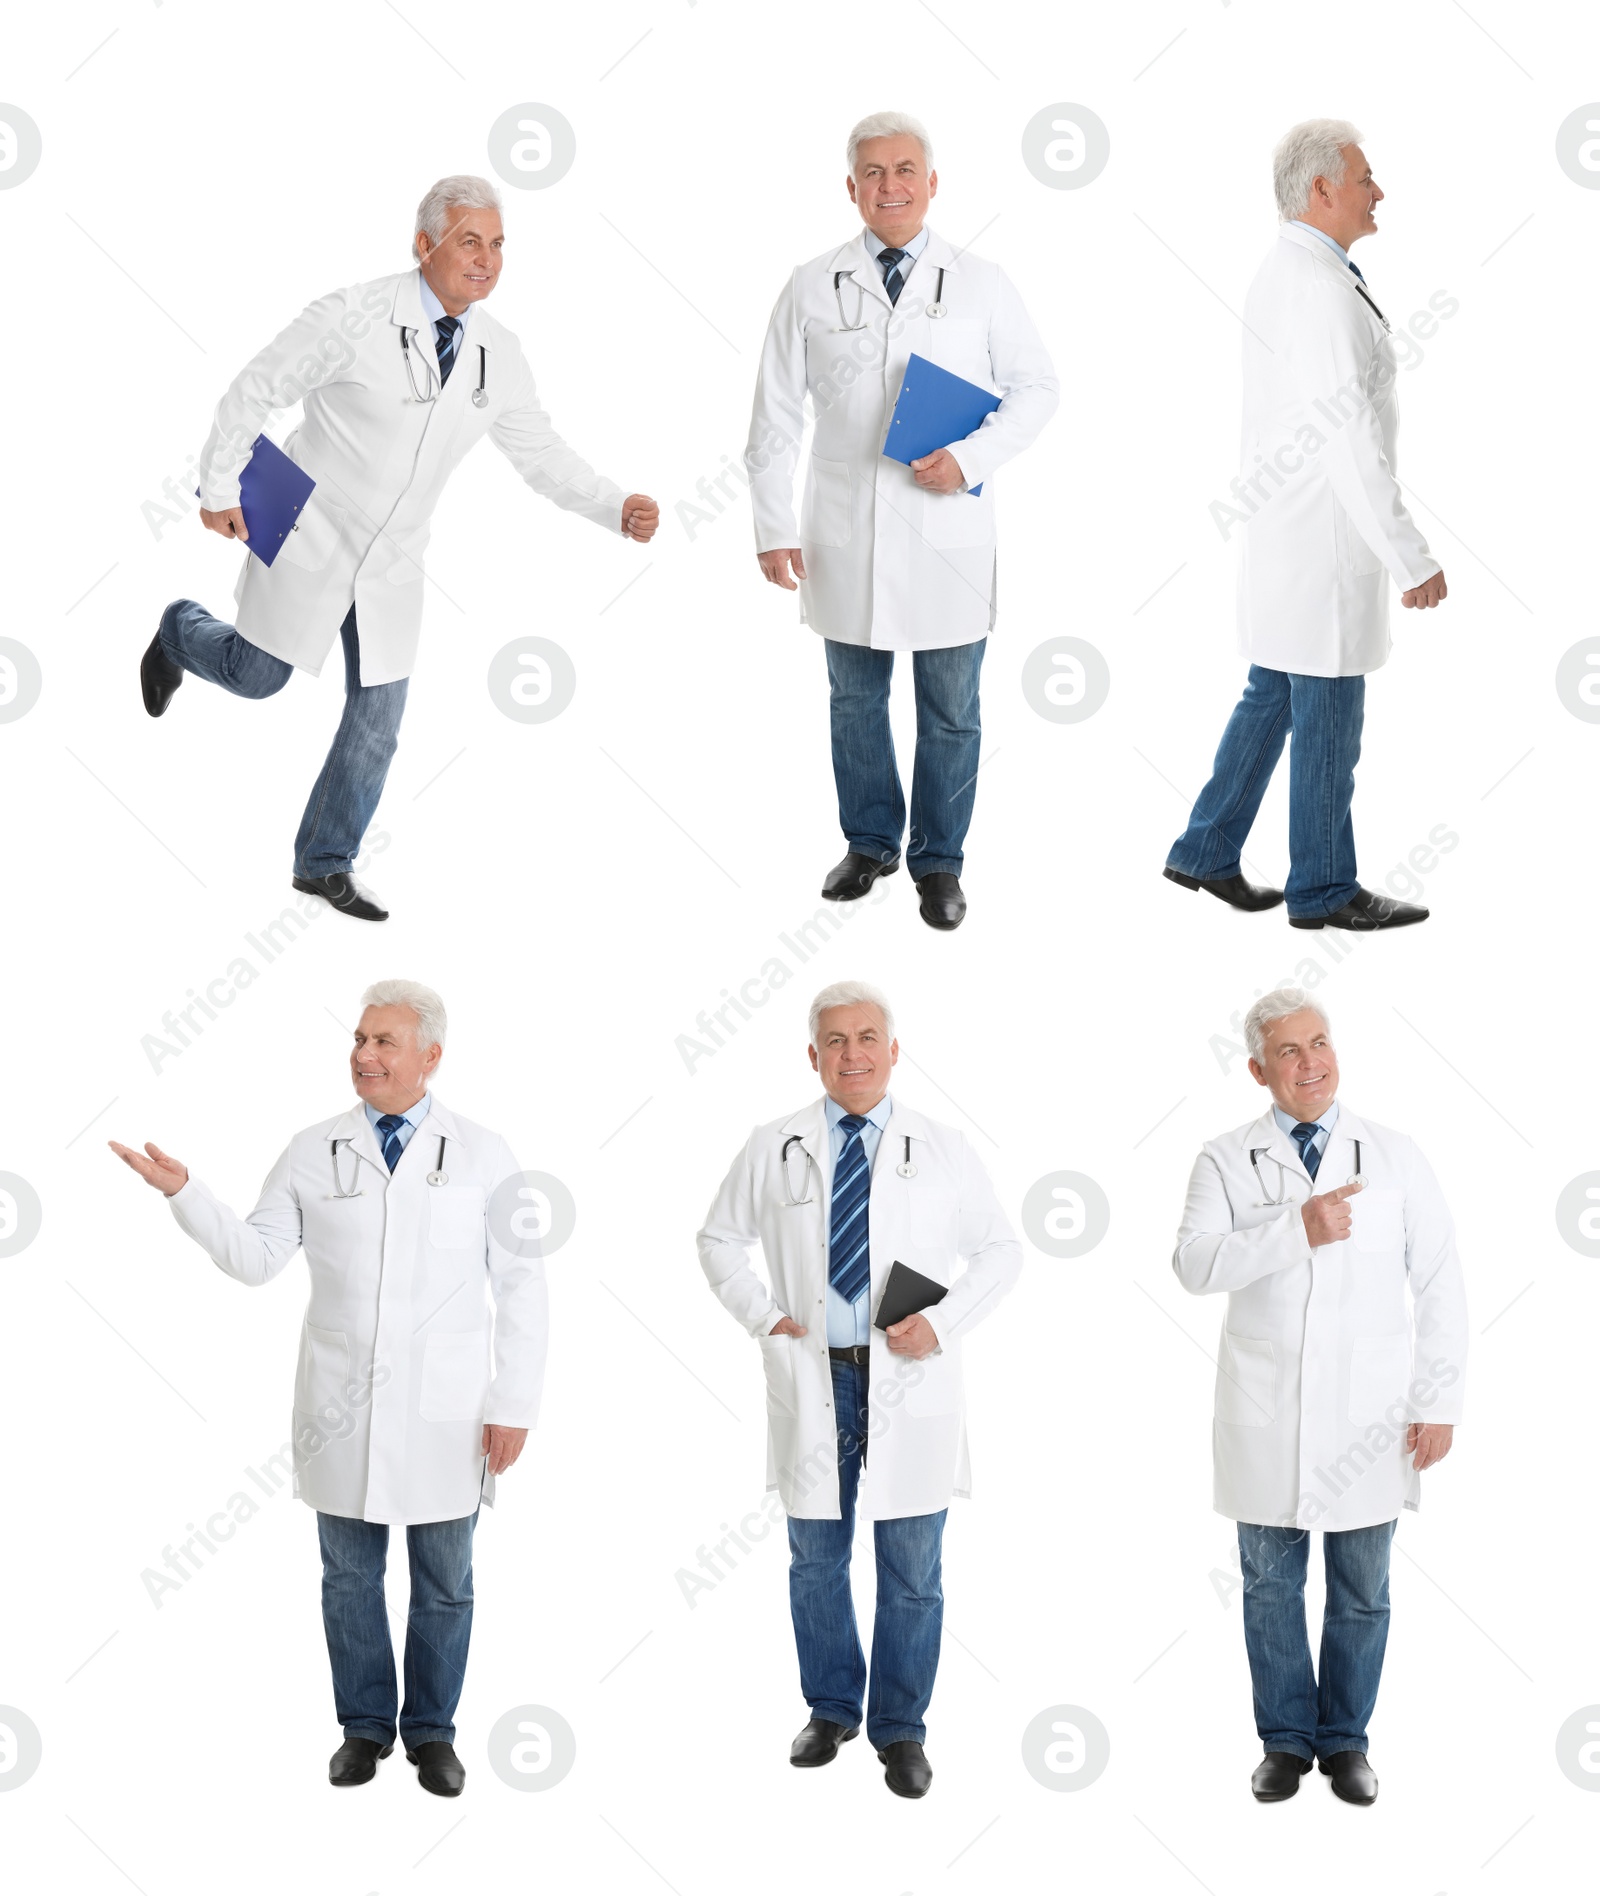 Image of Collage with photos of senior doctor on white background 